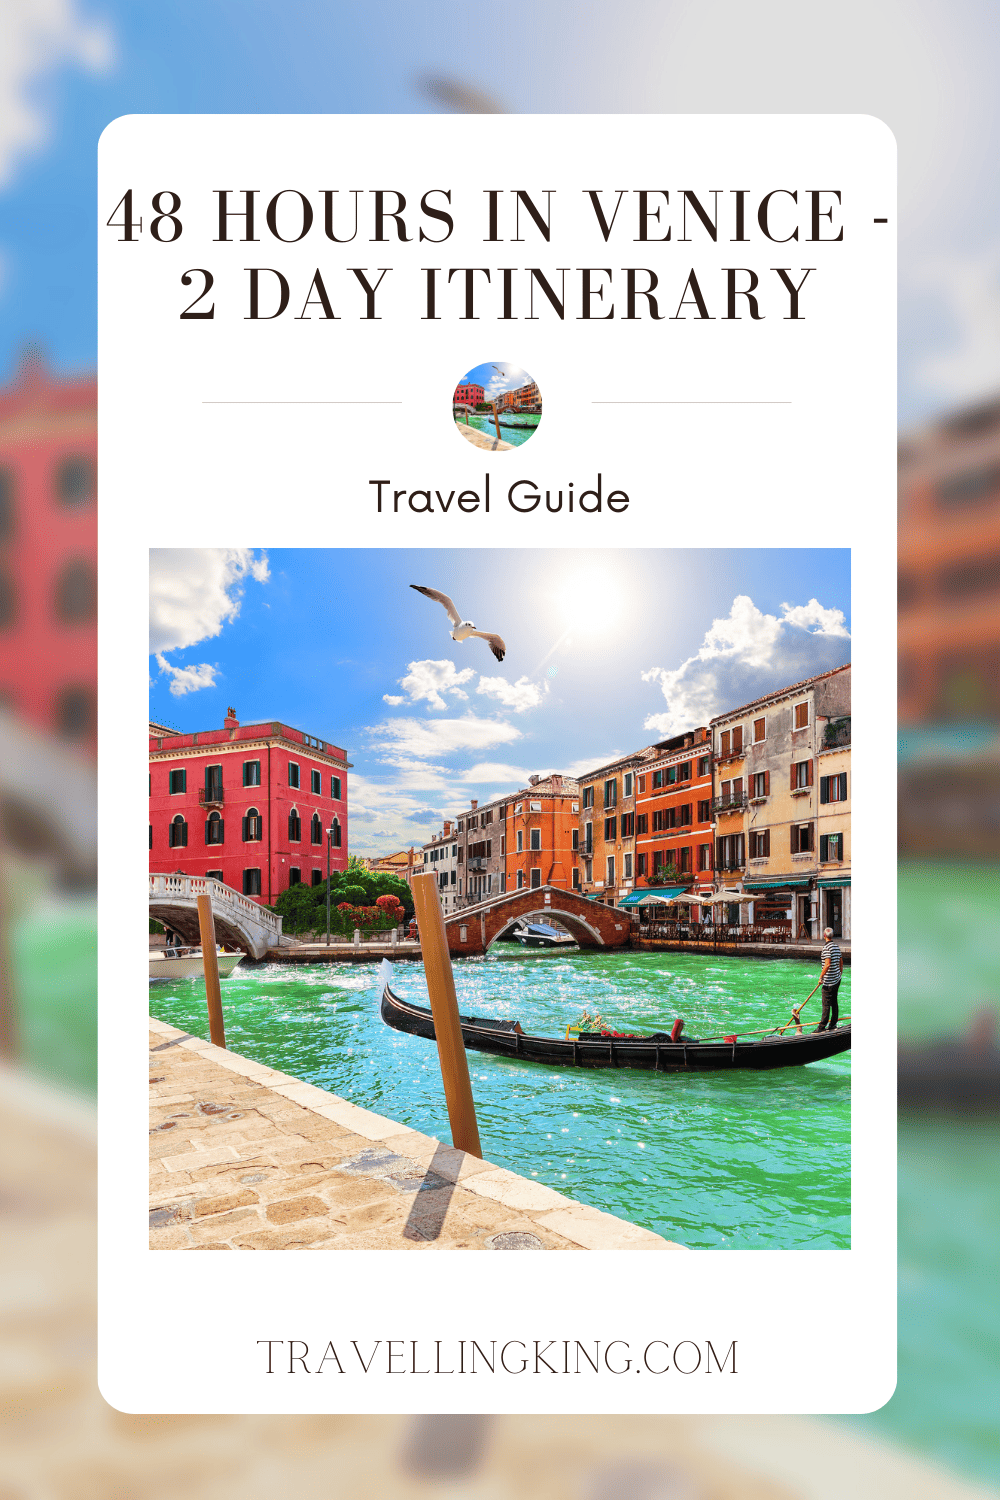 48 Hours in Venice - 2 Day Itinerary